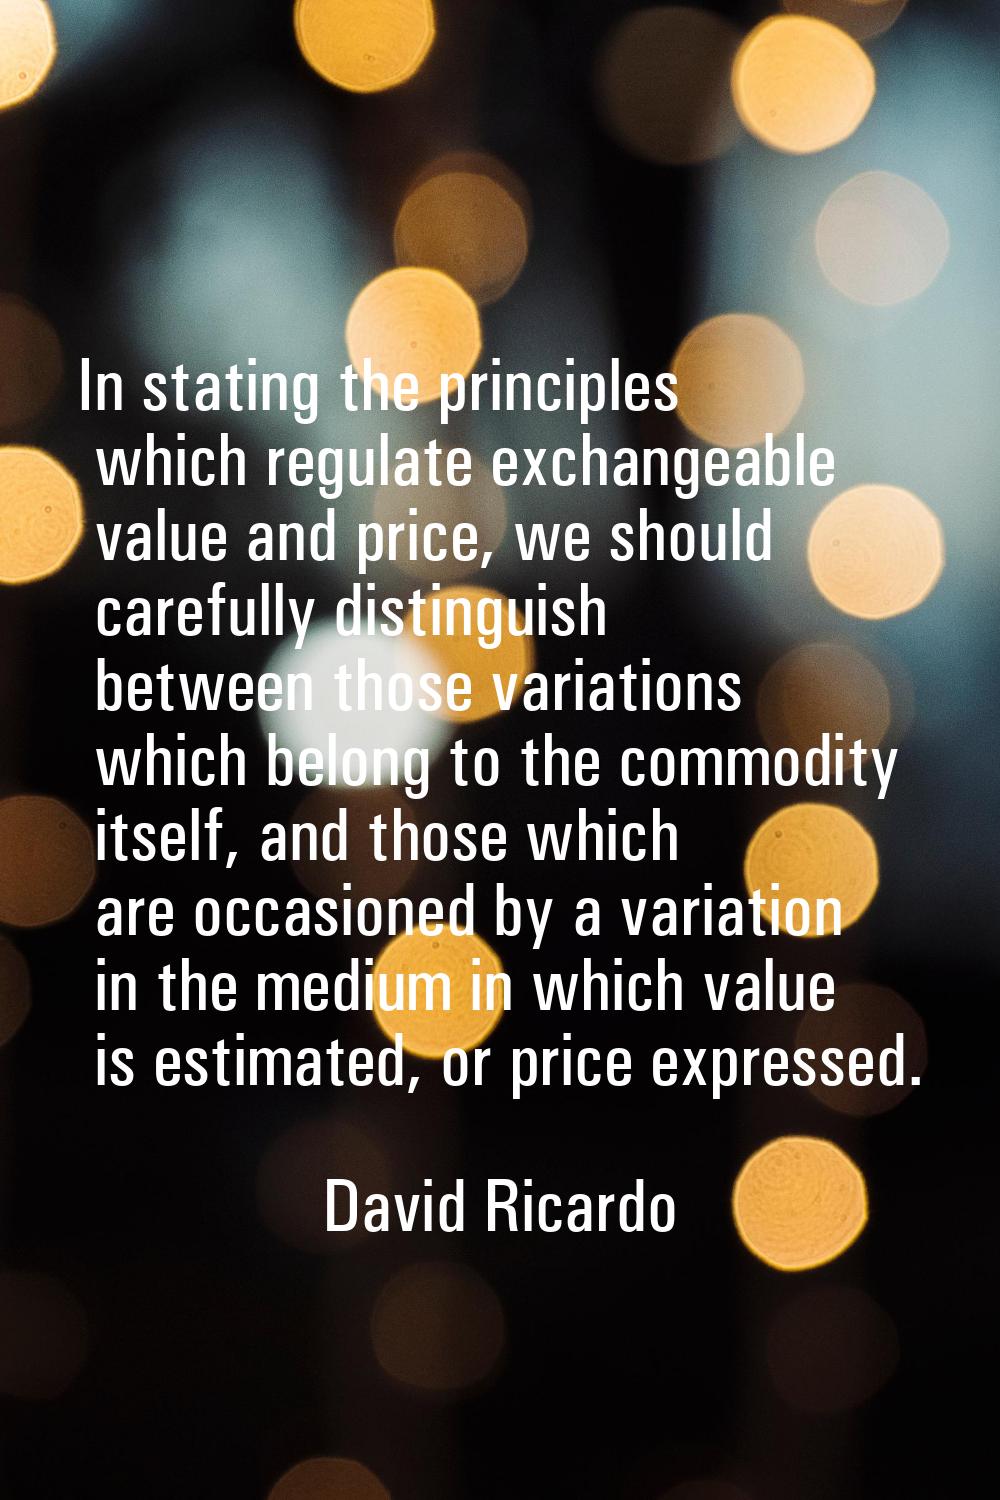 In stating the principles which regulate exchangeable value and price, we should carefully distingu